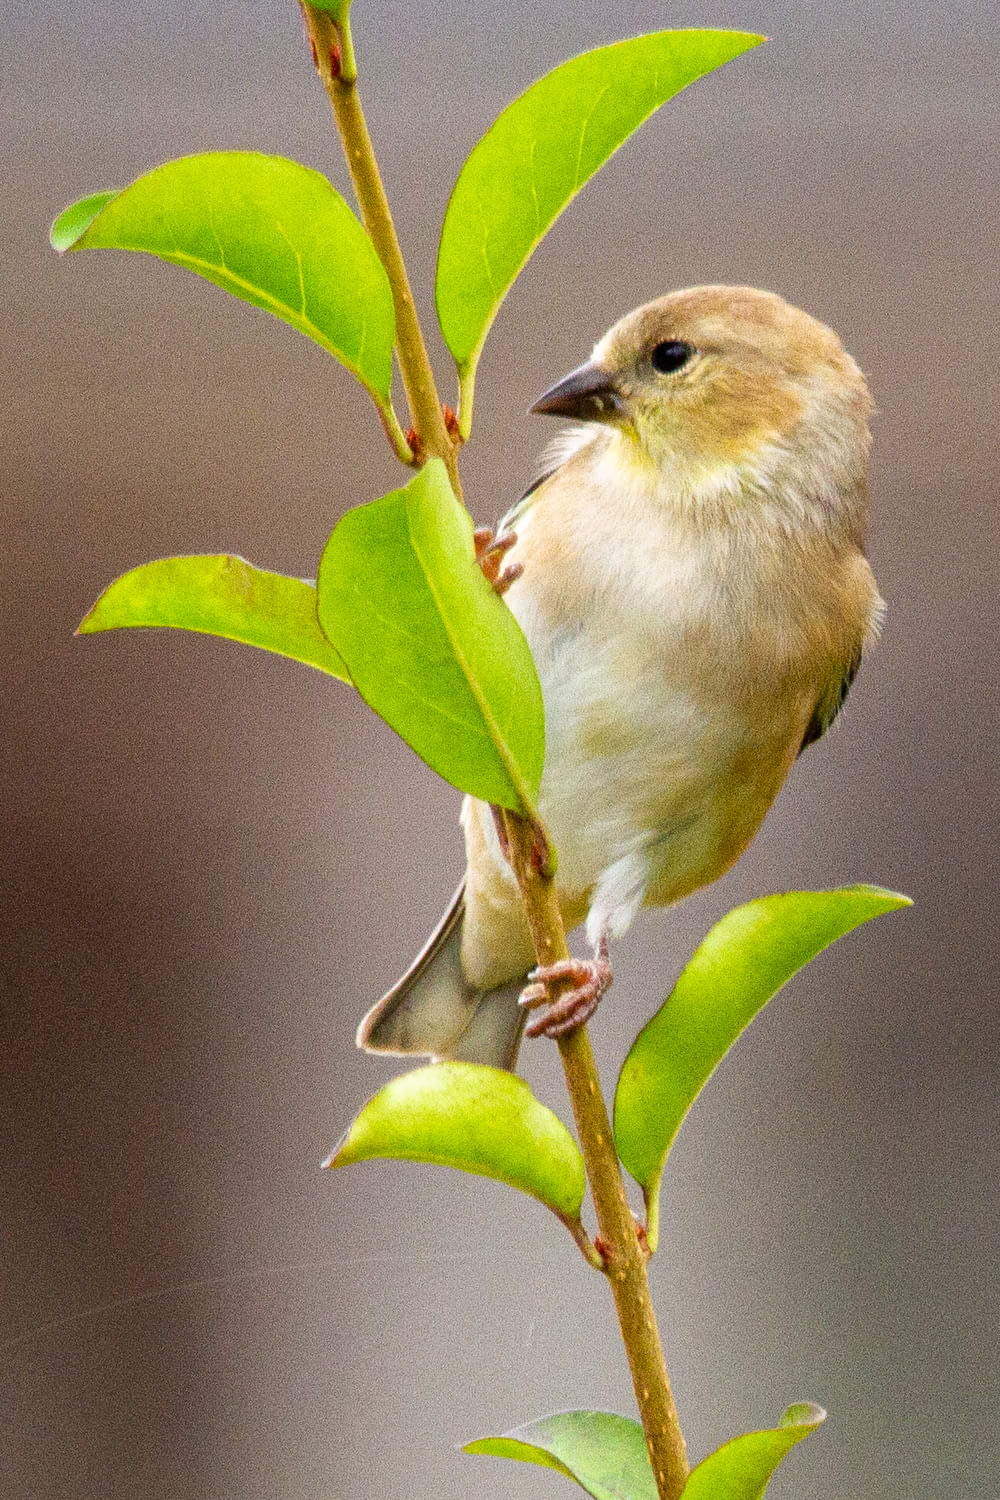 yellow bird perched on green leaf